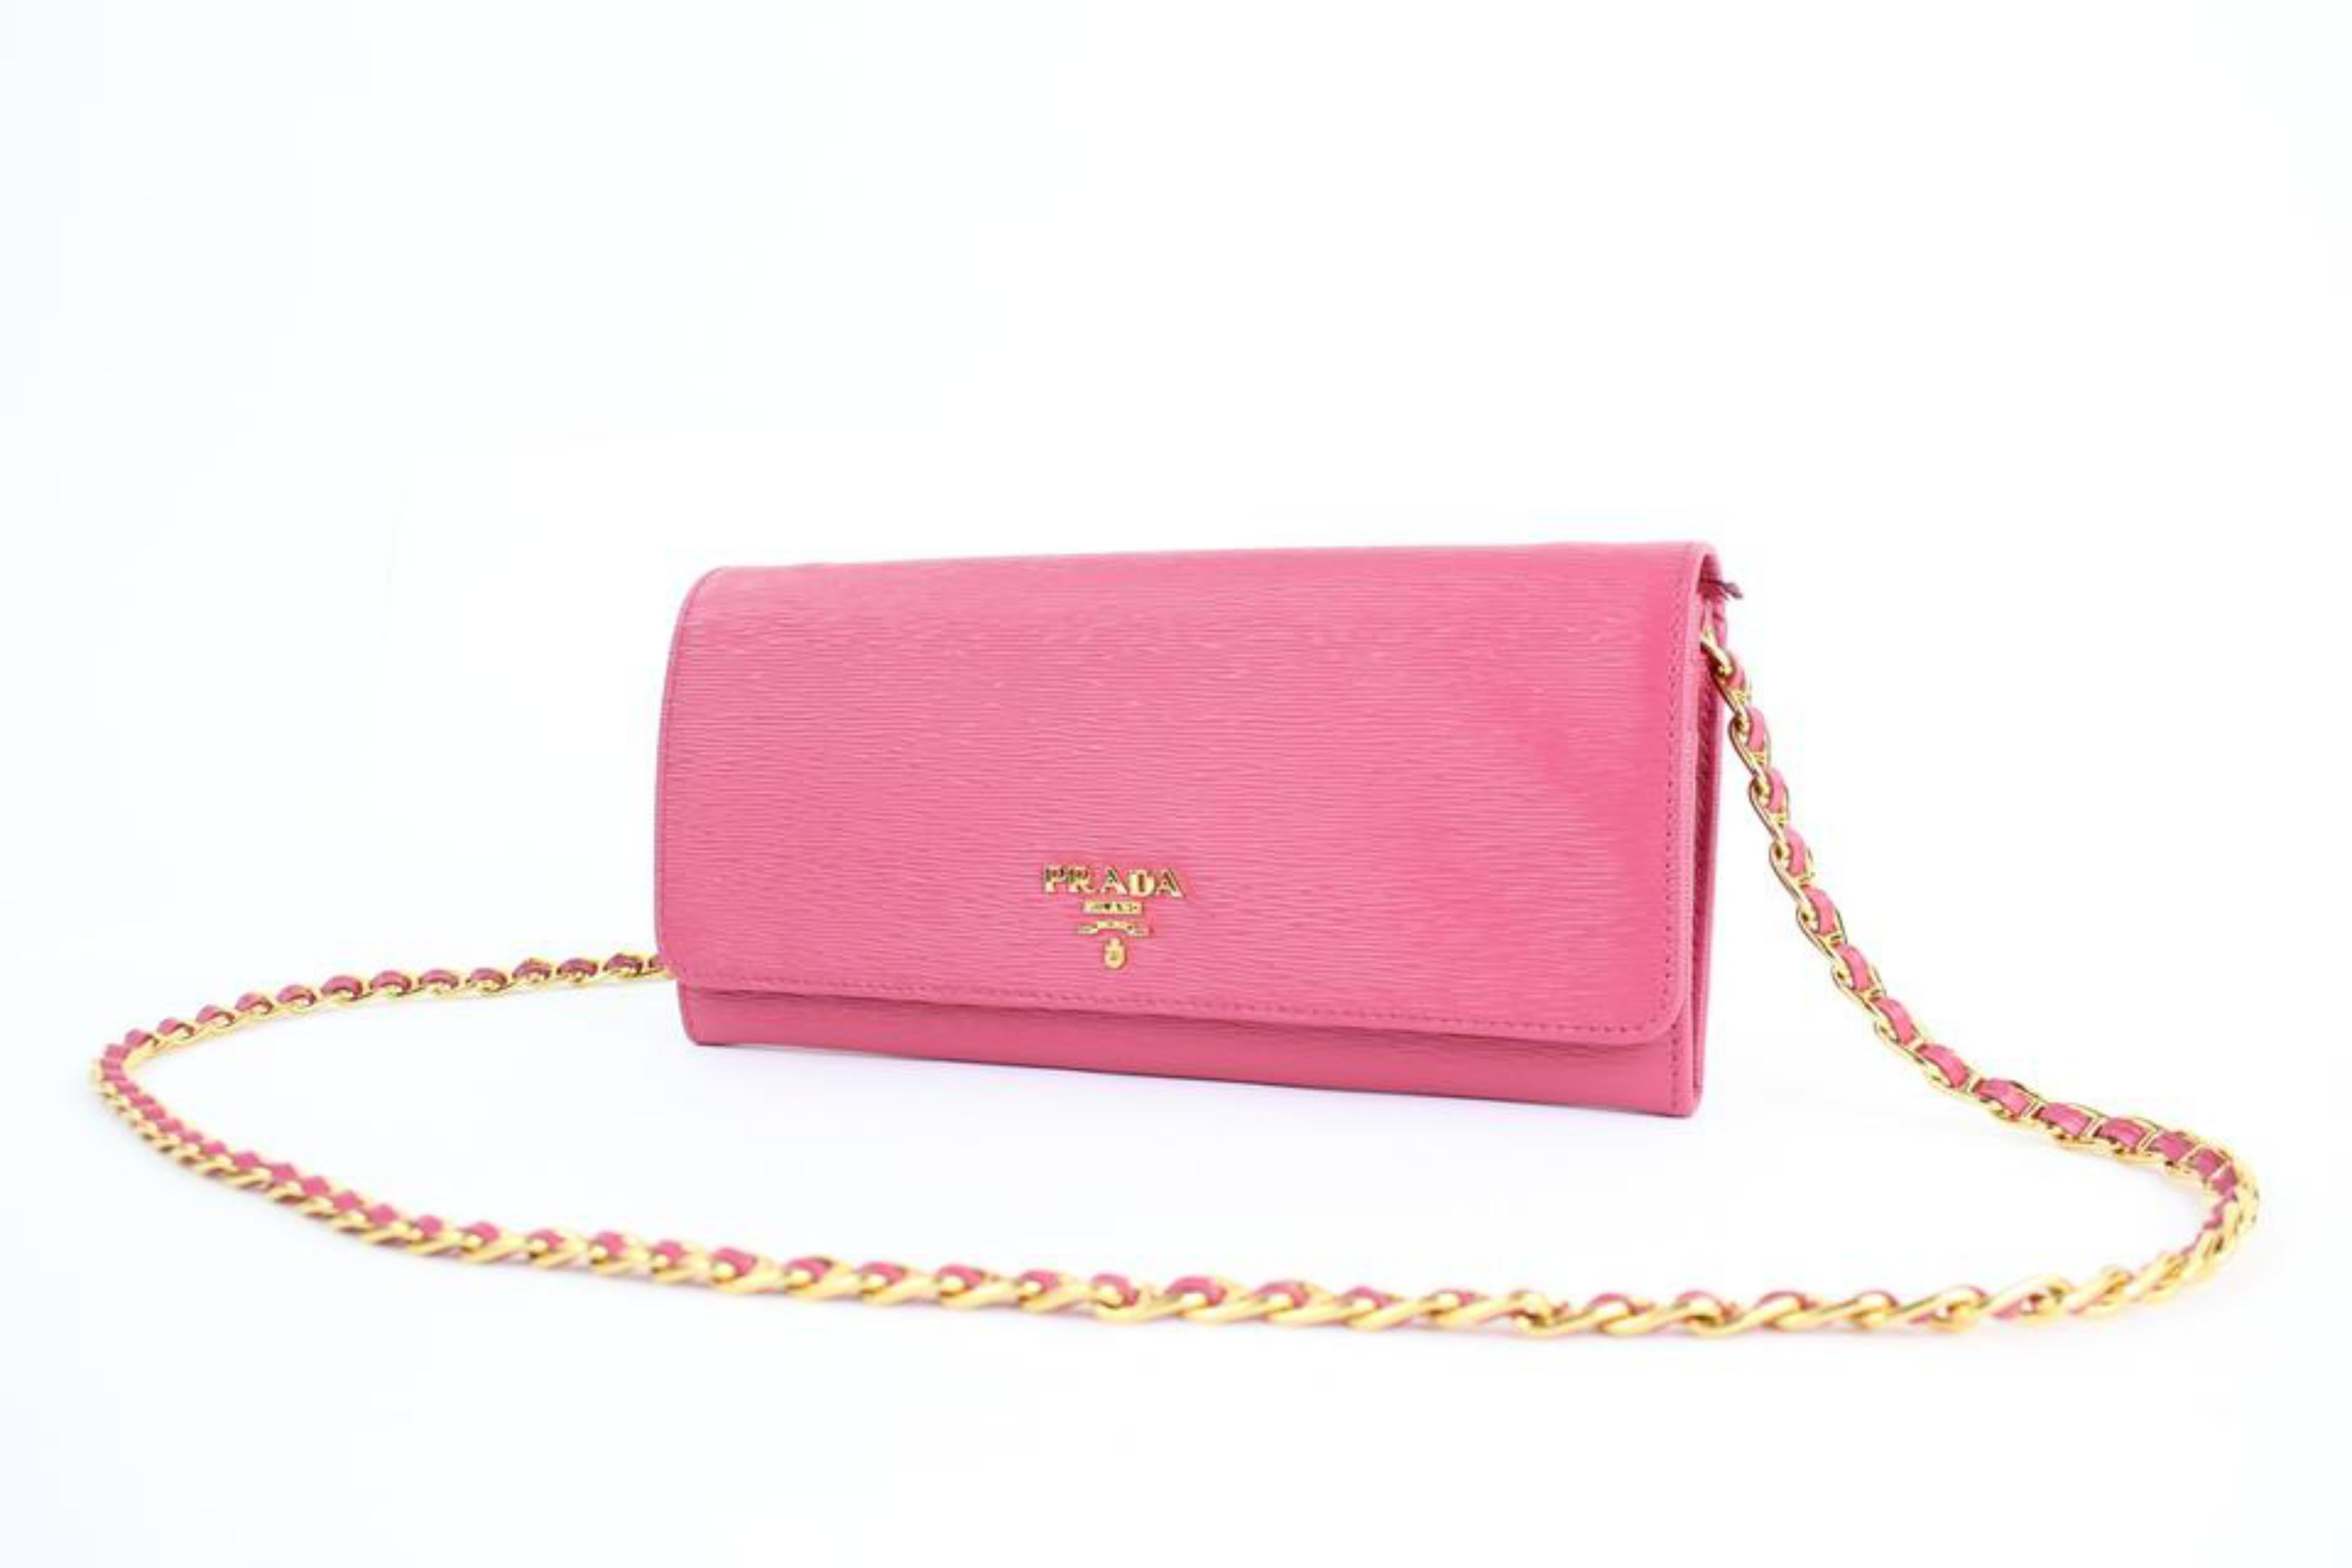 Prada Saffiano Metal Wallet On Chain Clutch 4pt916 Pink Leather Cross Body Bag For Sale 4